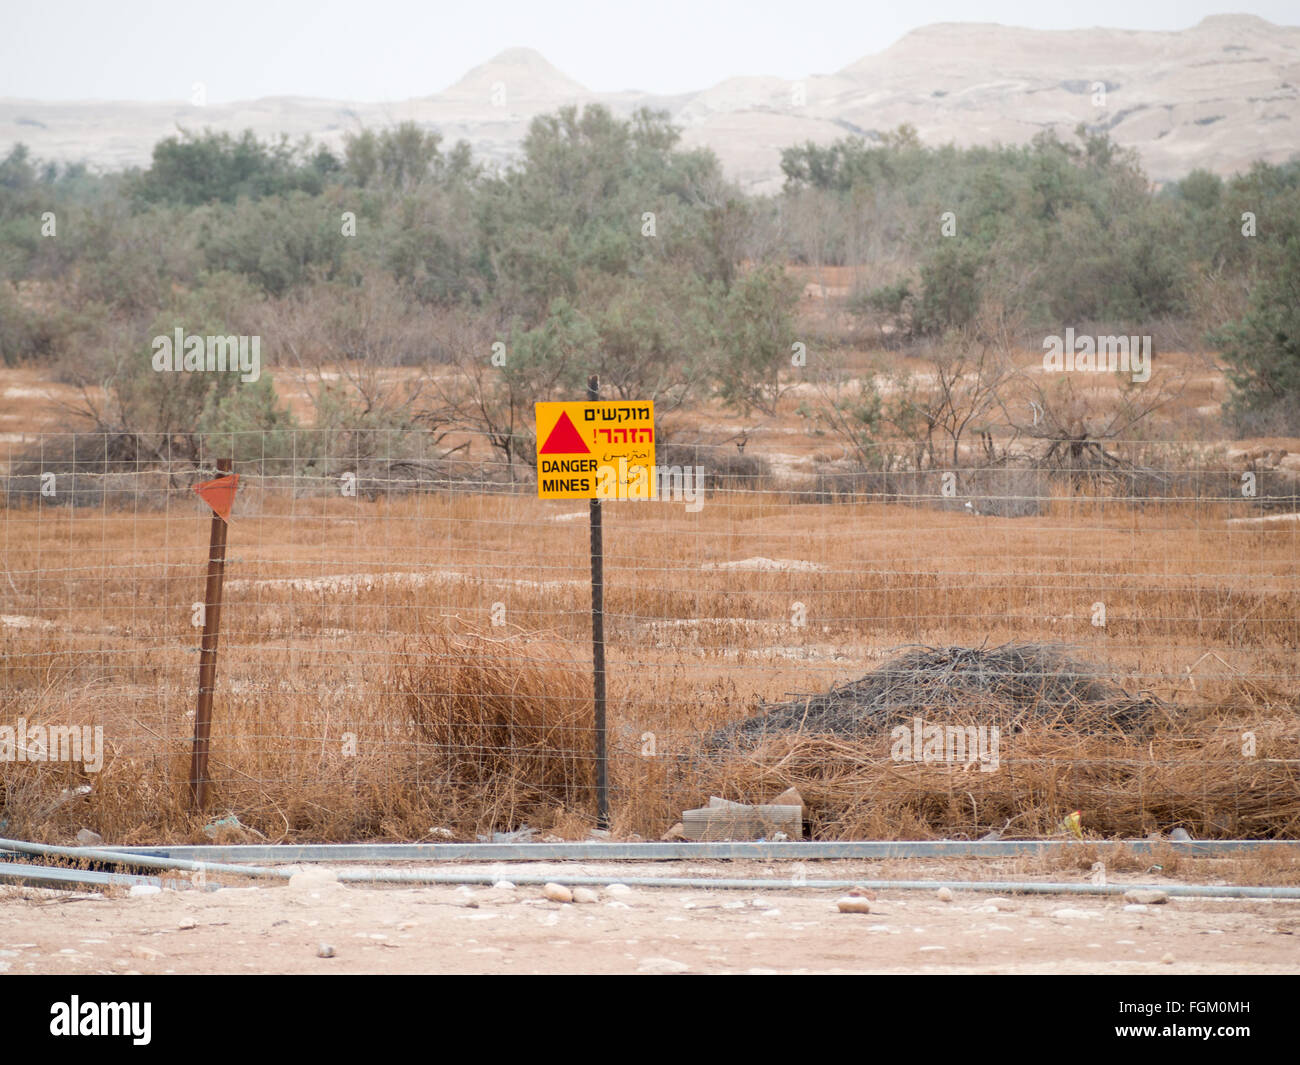 Mined field sign in Palestine Stock Photo